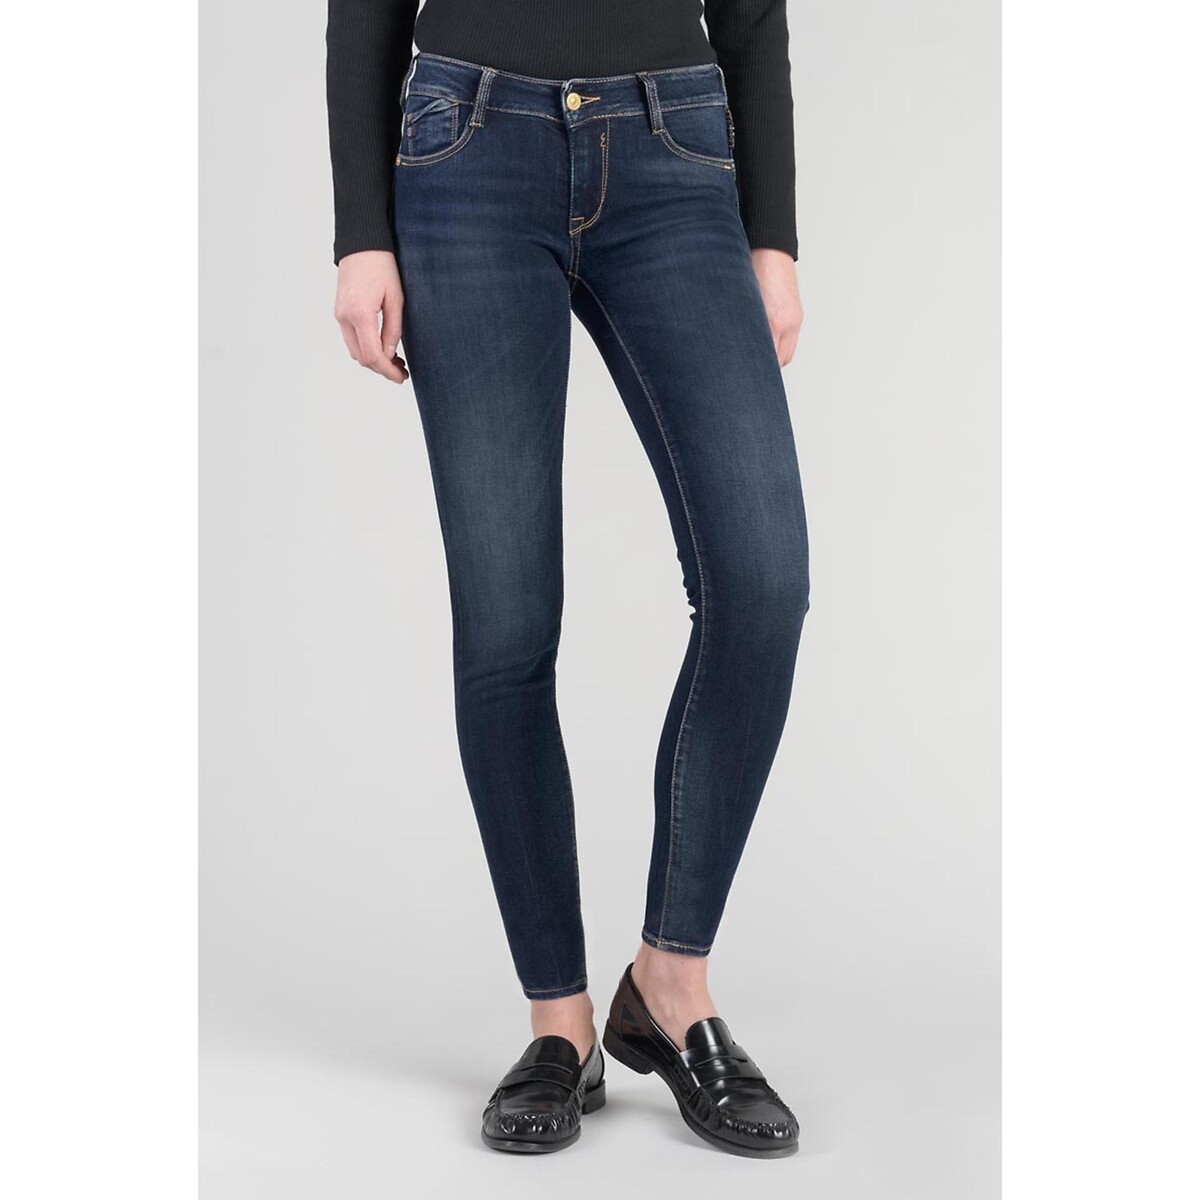 Ferry Pulp Skinny Jeans